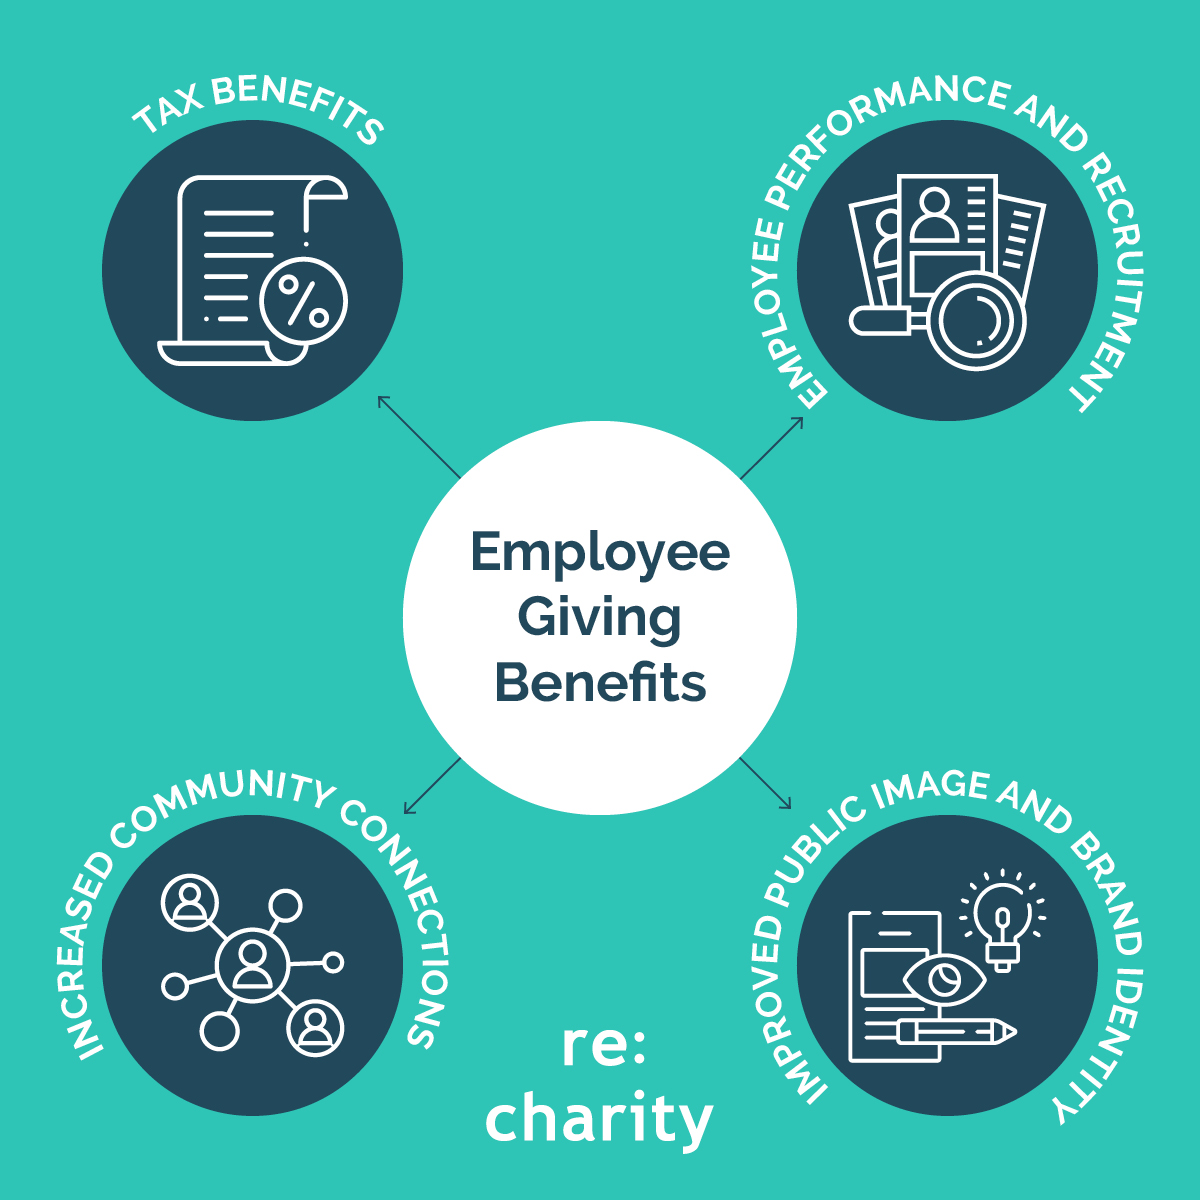 a graphic explaining the top four employee giving benefits for companies, as explained below.